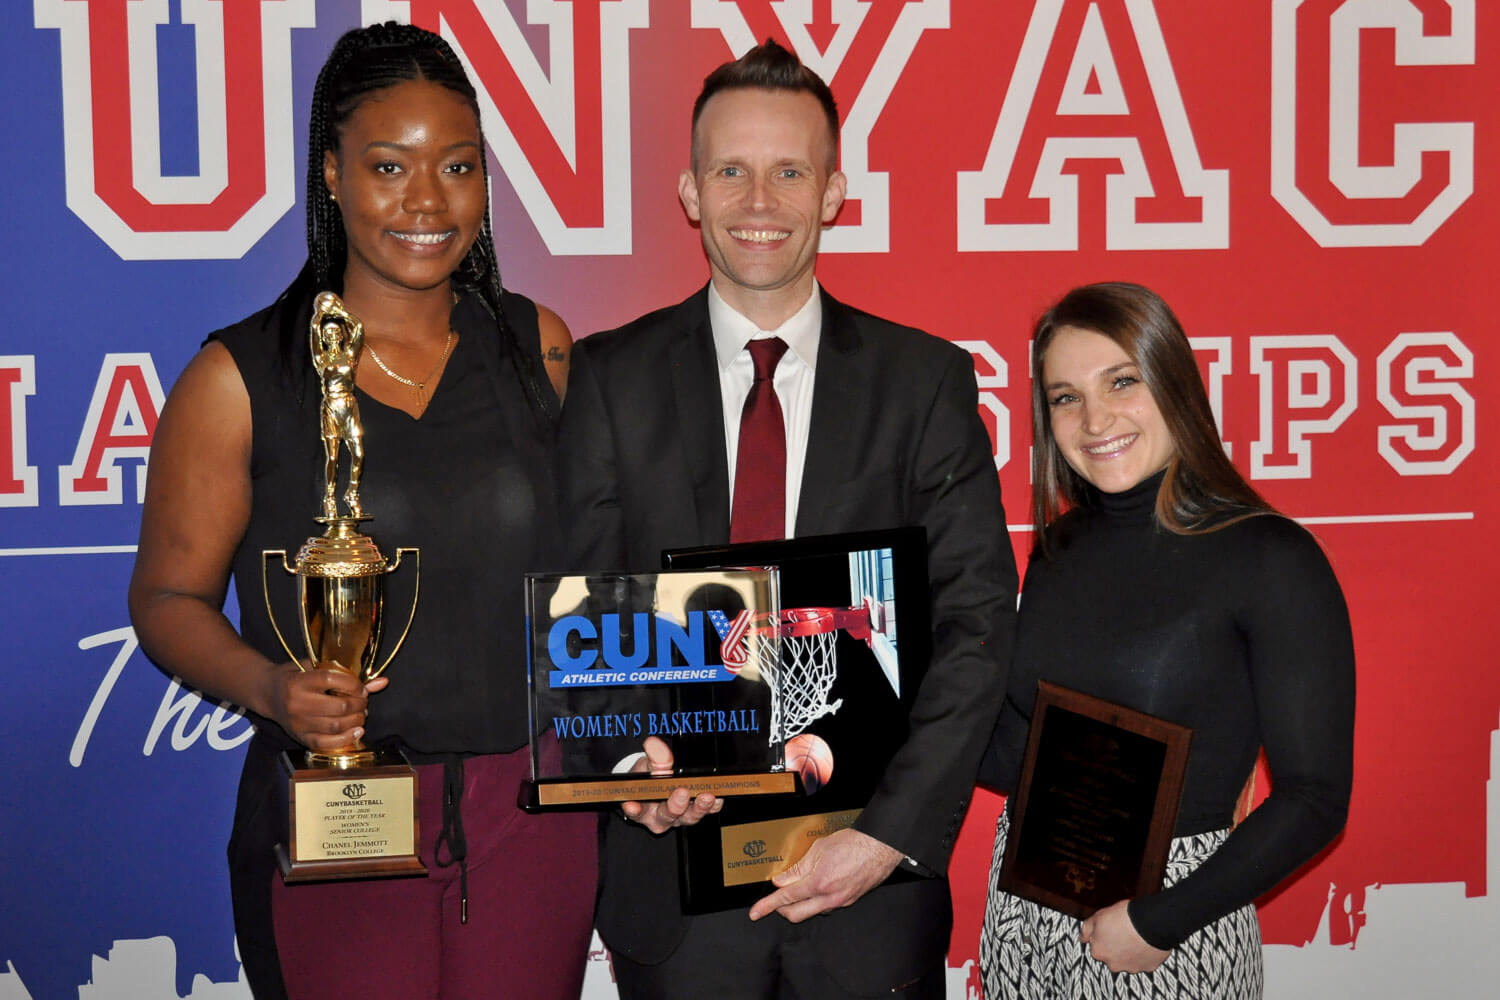 2020 CUNYAC Basketball Awards Luncheon (L-R) Chanel Jemmott (CUNYAC Women's Basketball Player of the Year), Alex Lang (CUNYAC Women’s Basketball Coach of the Year), and Taylor George (CUNYAC Women's Basketball First Team All-Star)